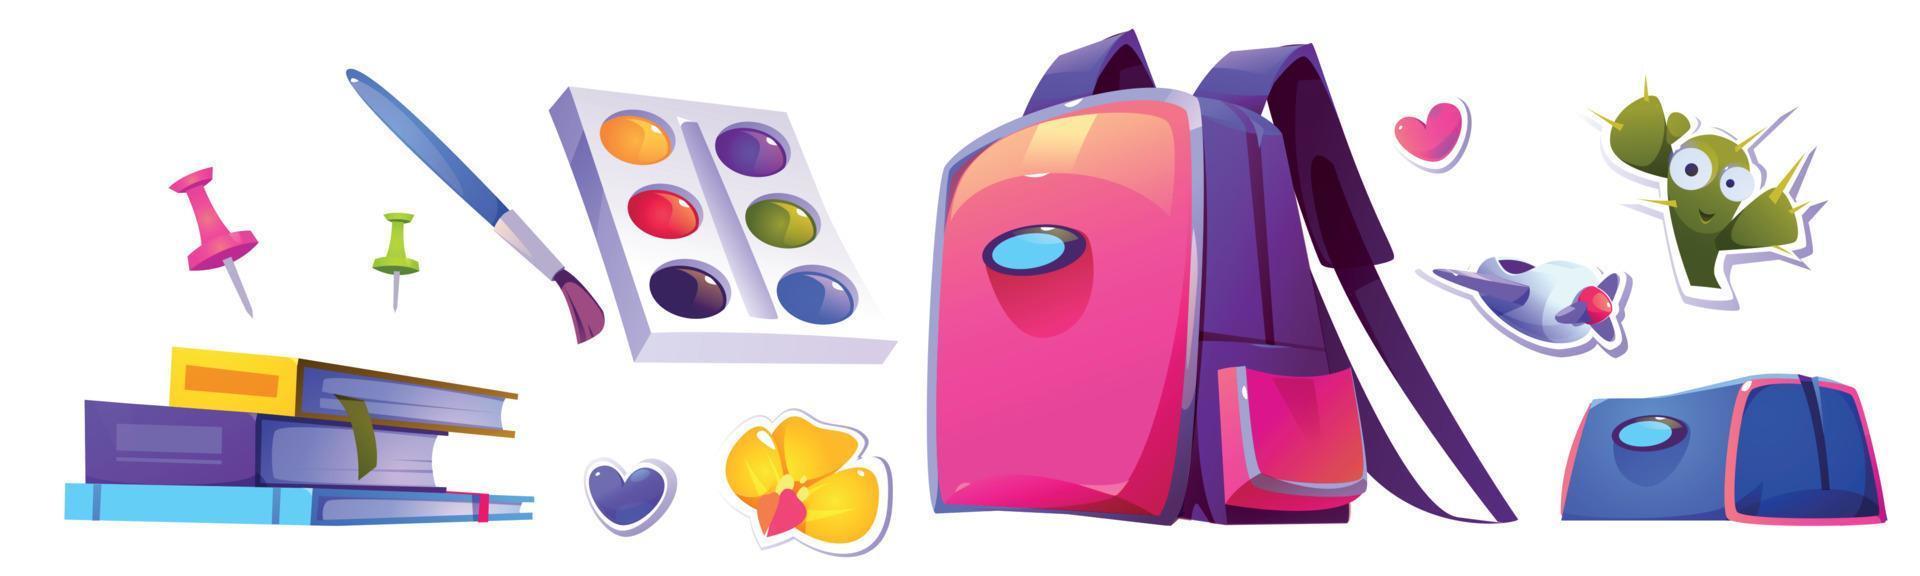 School stationery and supplies, backpack, stickers vector